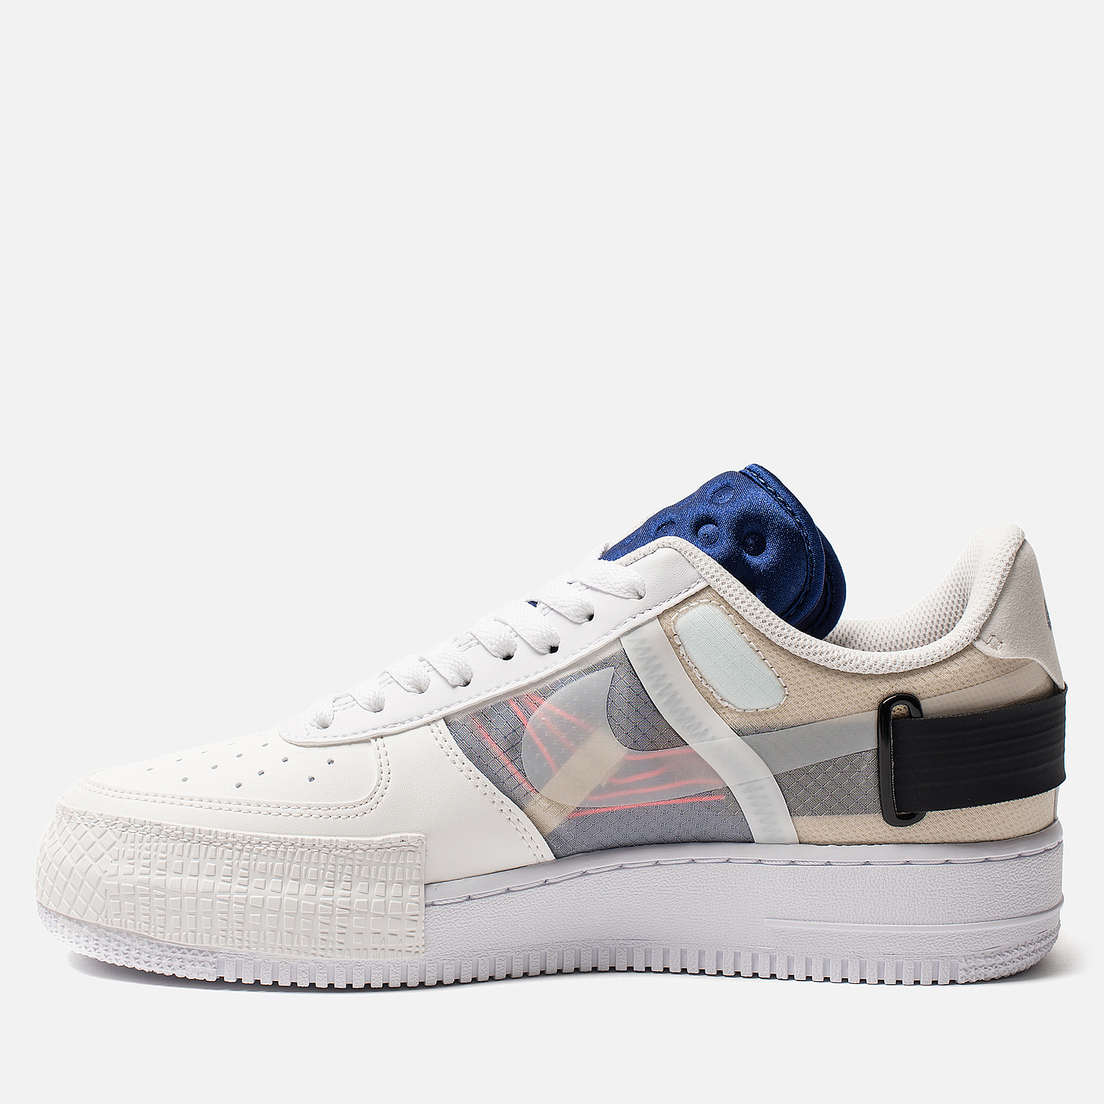 air force 1 type